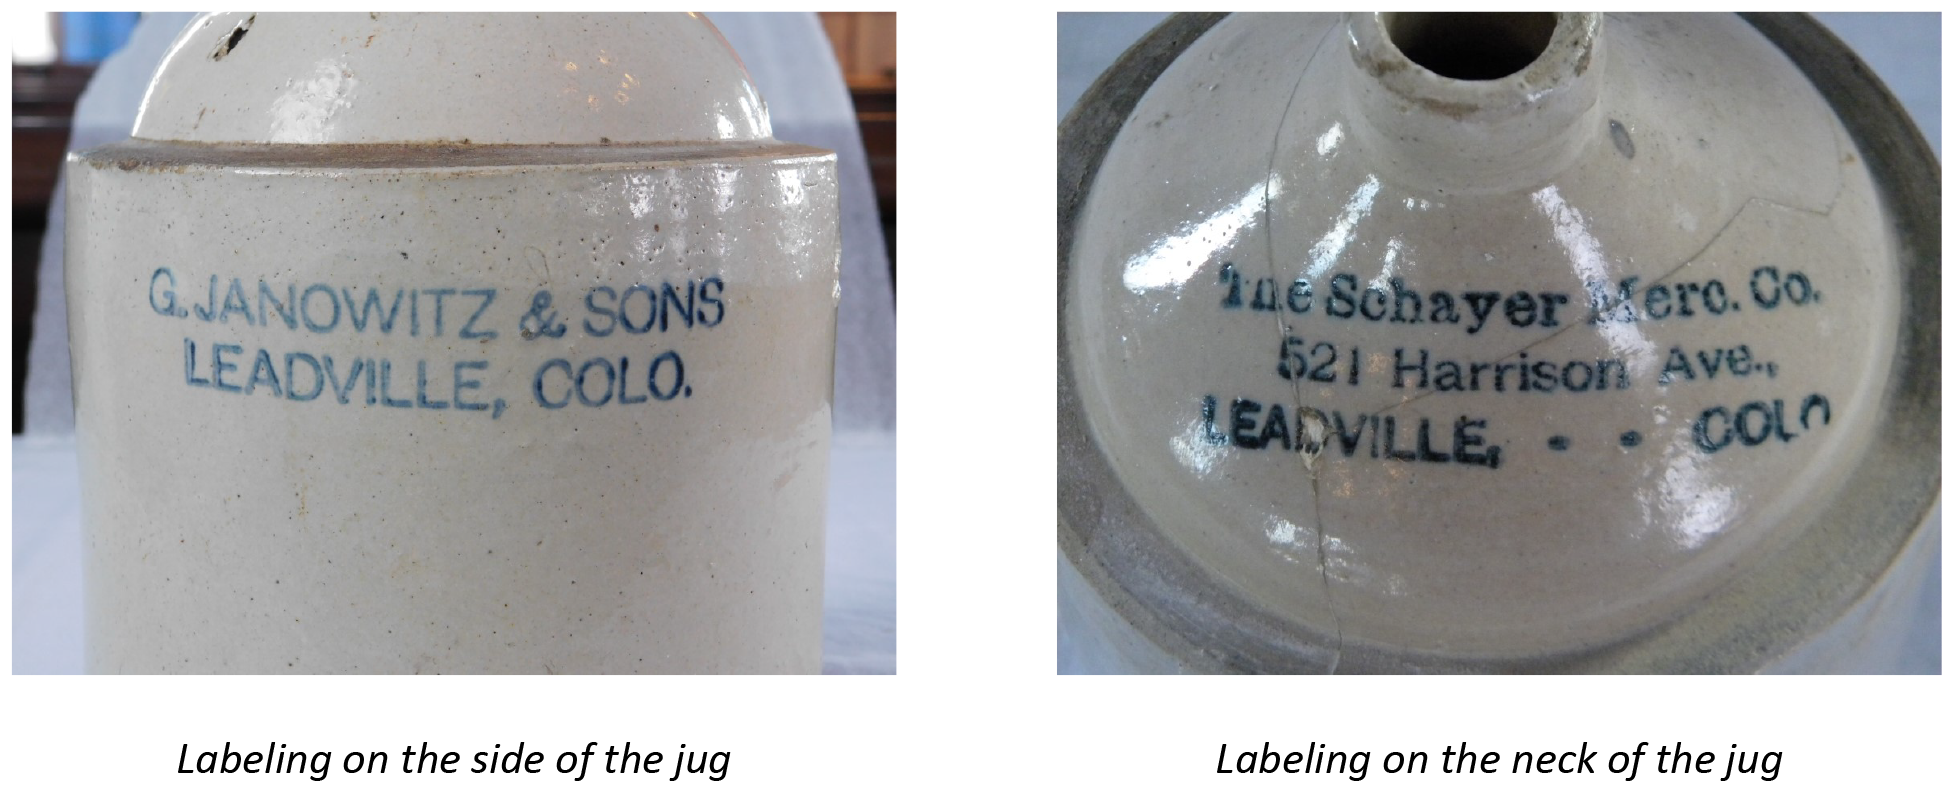 Labeling on the side or the neck of the jug.